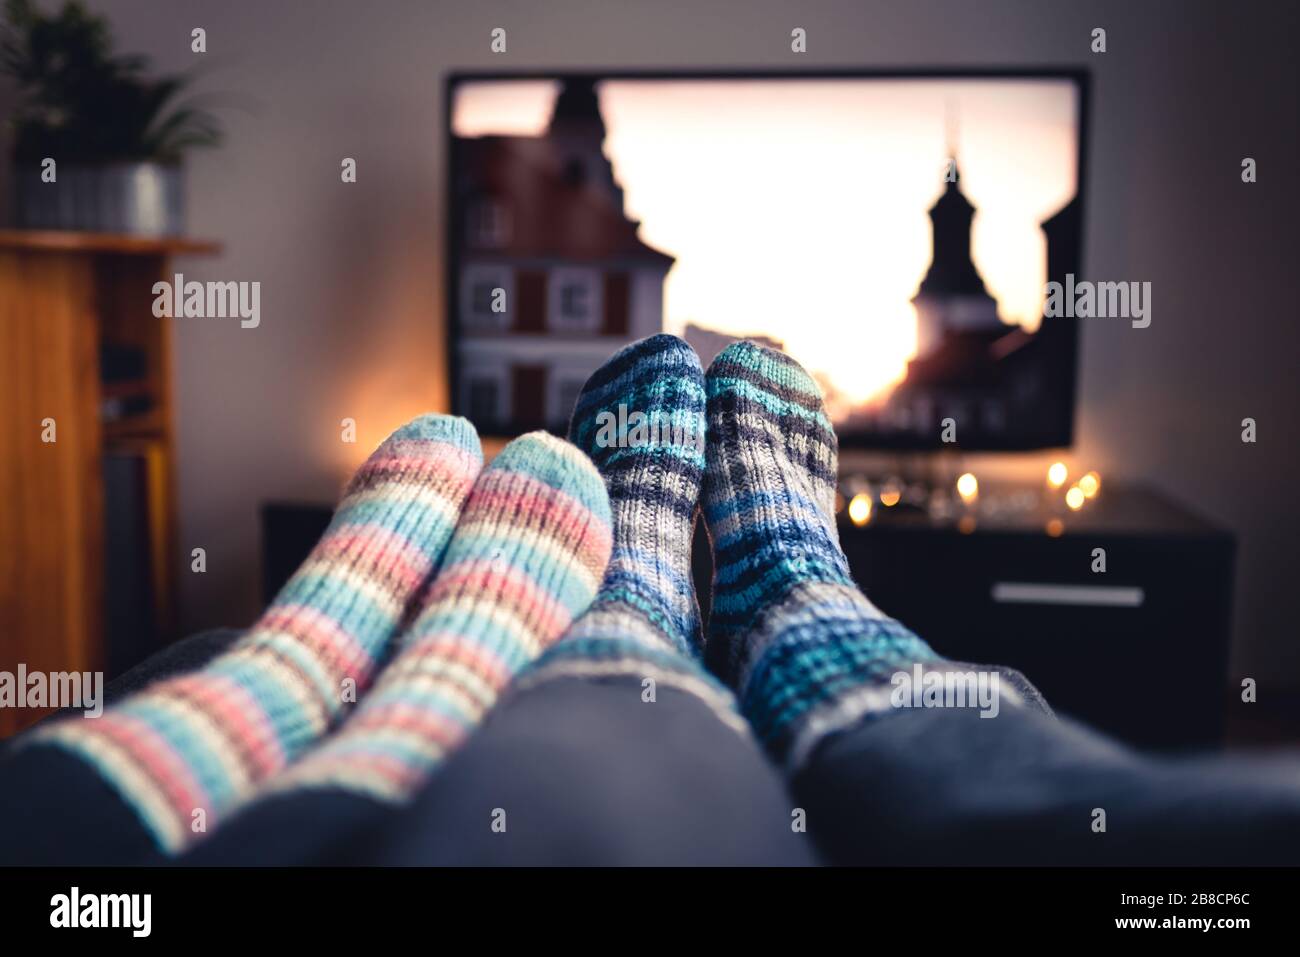 Couple with socks and woolen stockings watching movies or series on tv in winter. Woman and man sitting or lying together on sofa couch at home. Stock Photo